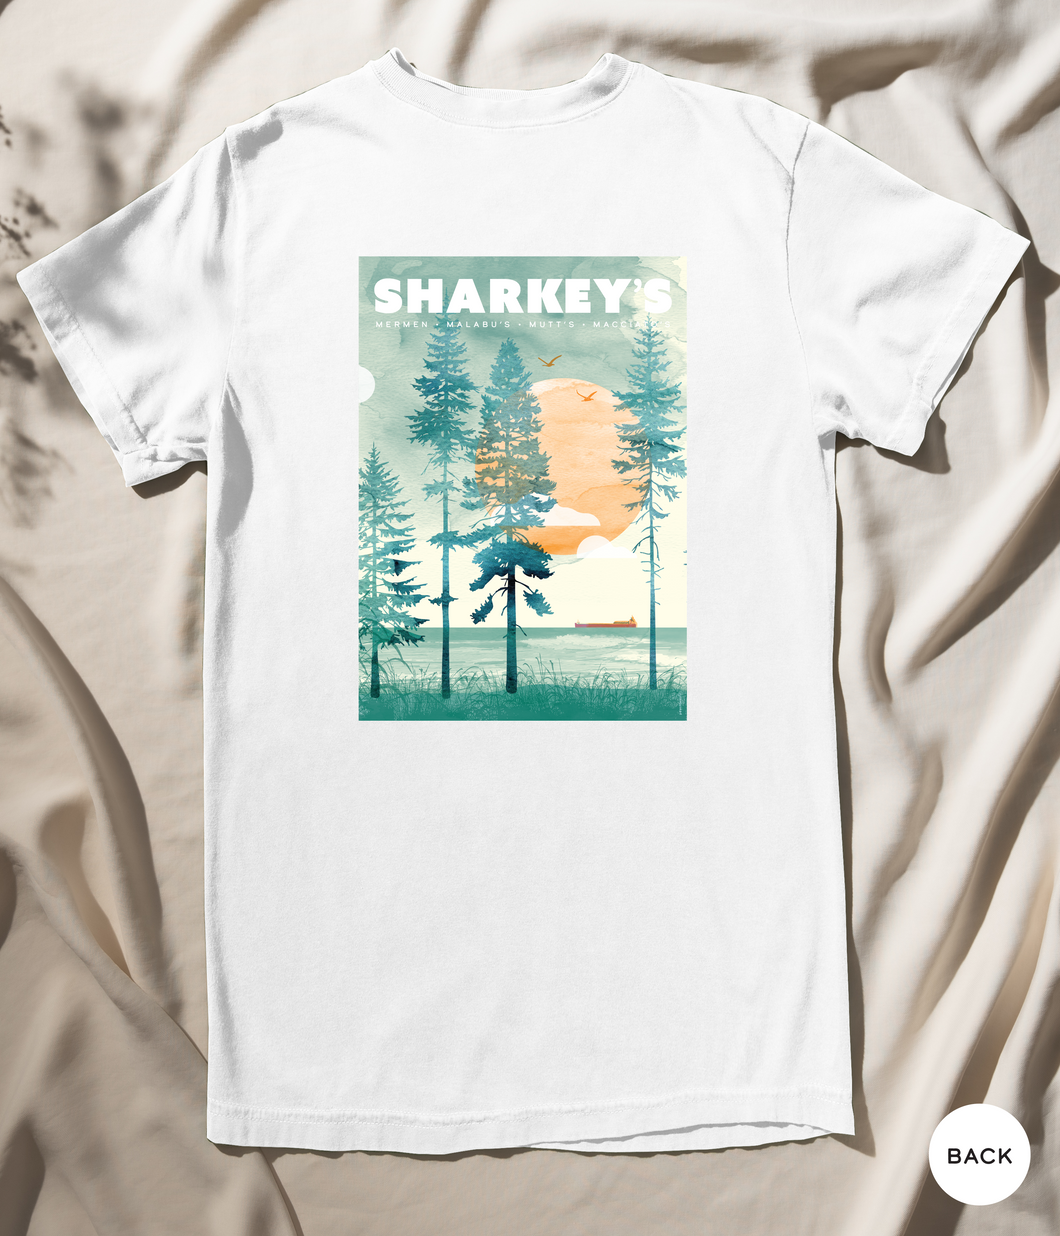 ANYWHEN SHARKEY'S T-SHIRT - PRE-ORDER FOR CHRISTMAS